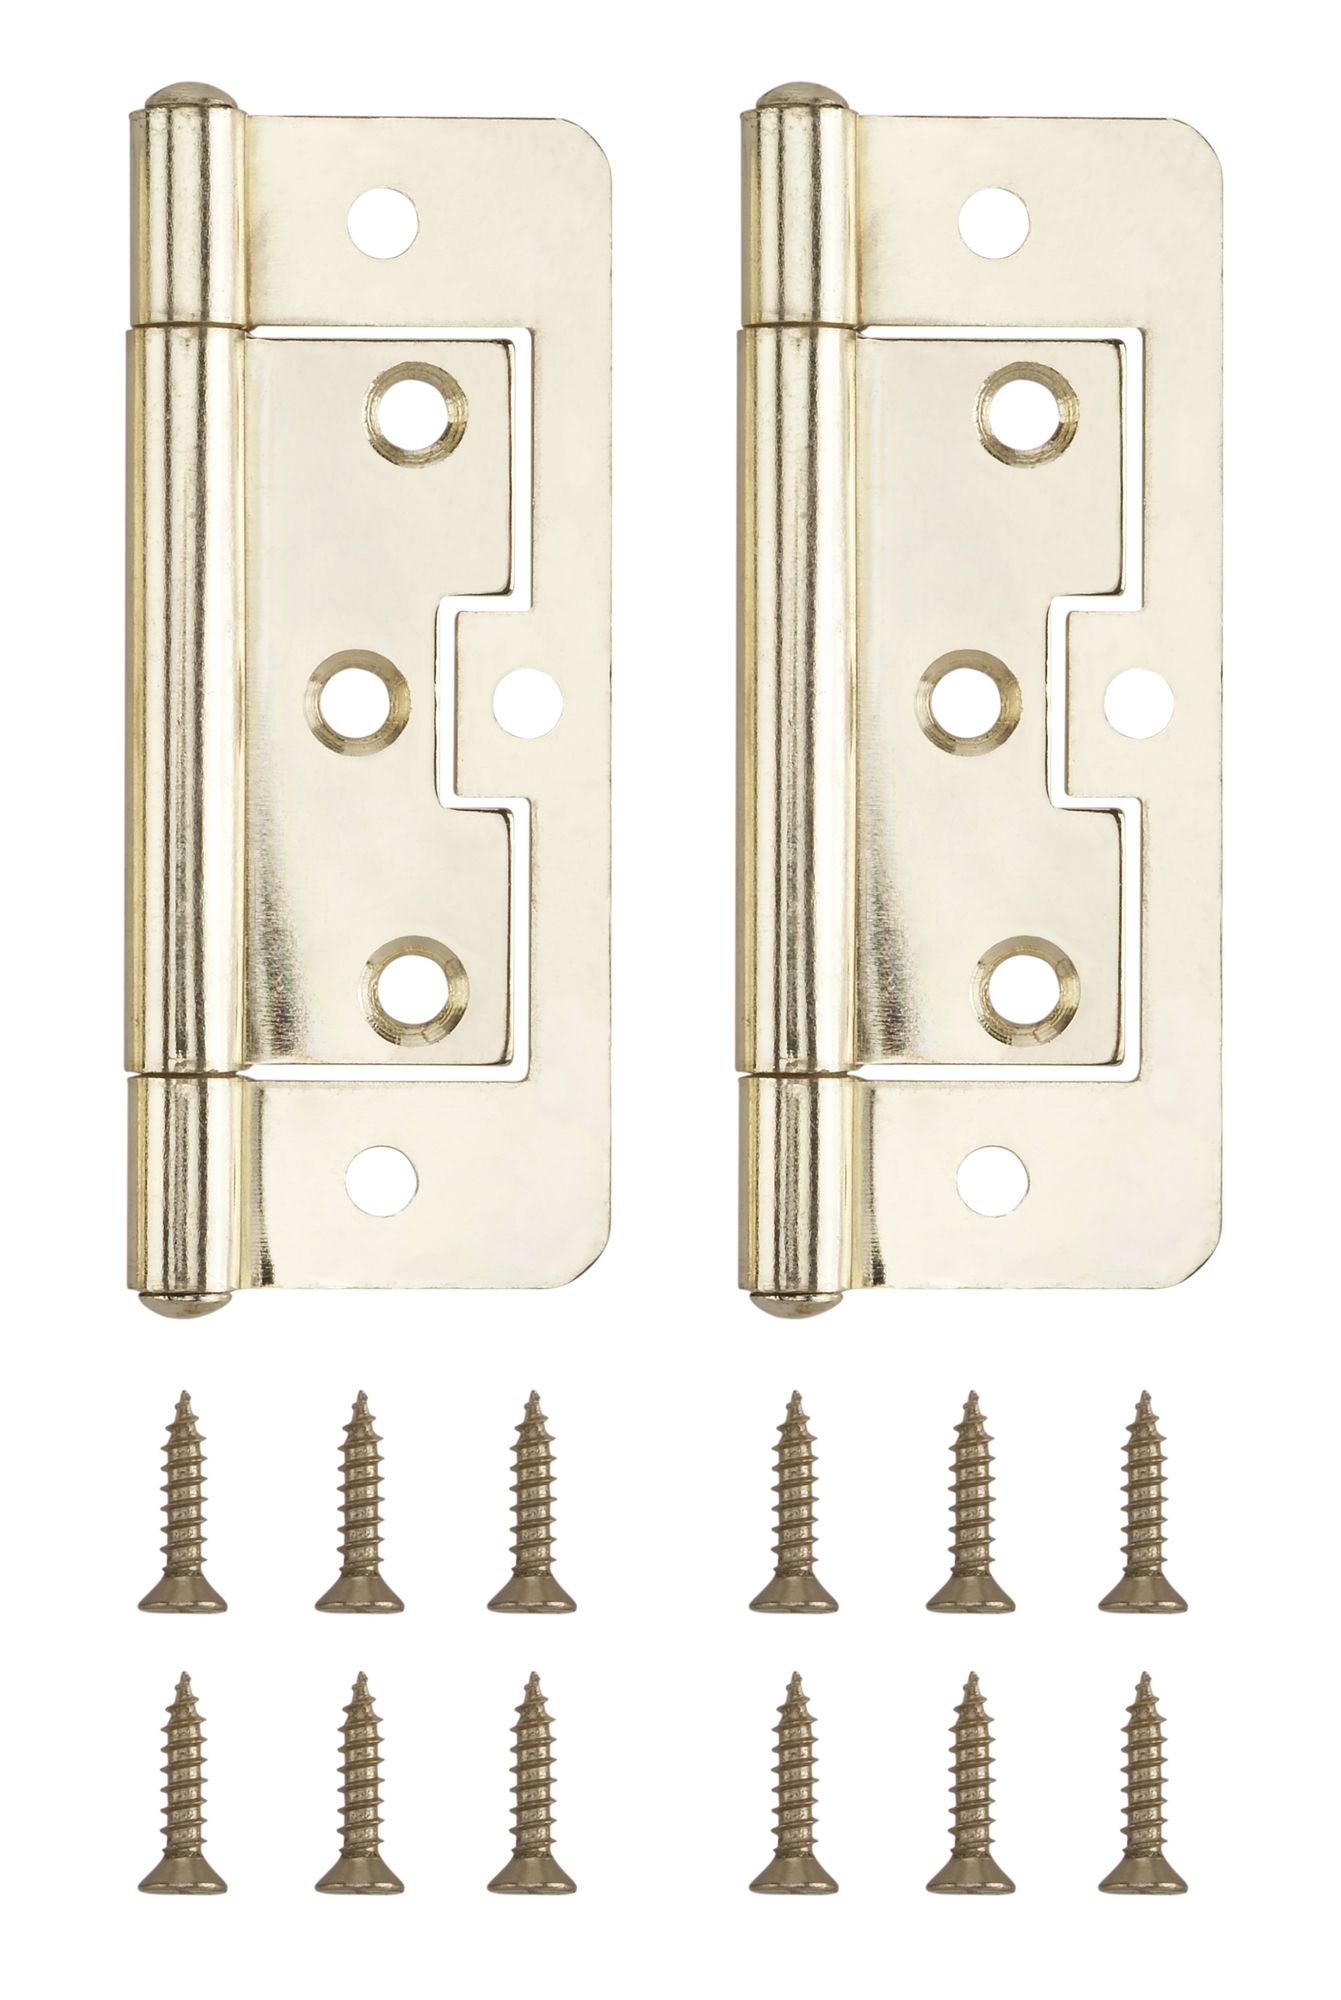 Pair of Brass plated Hinges - Brass Plated Steel BUTTERFLY HINGE -  Decorative Hinge